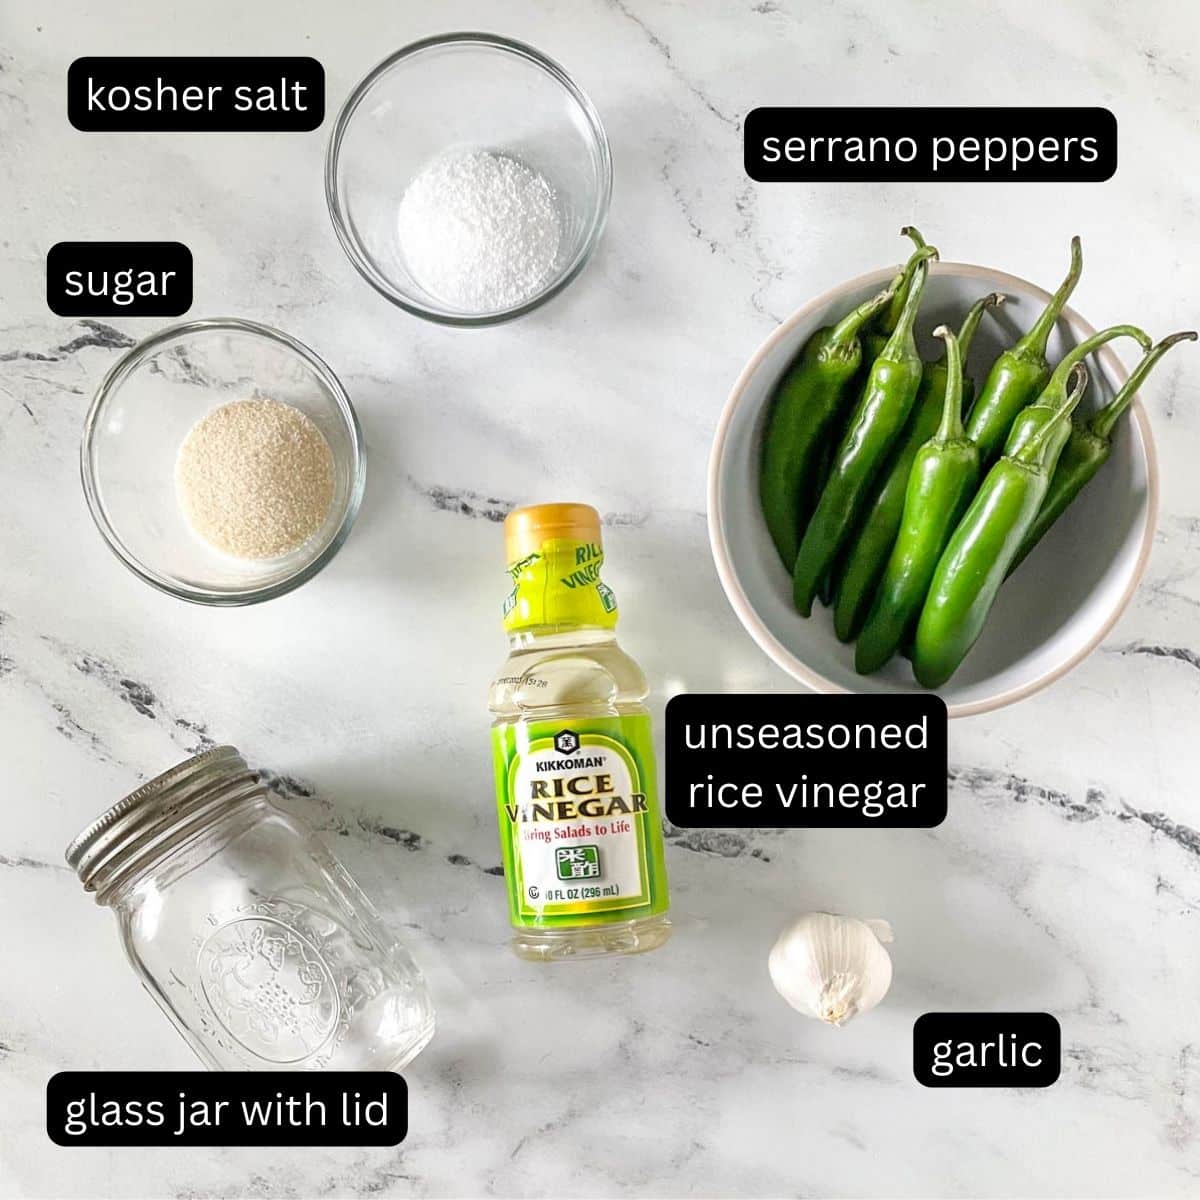 The labeled ingredients for pickled serrano peppers are shown on a white marble counter.